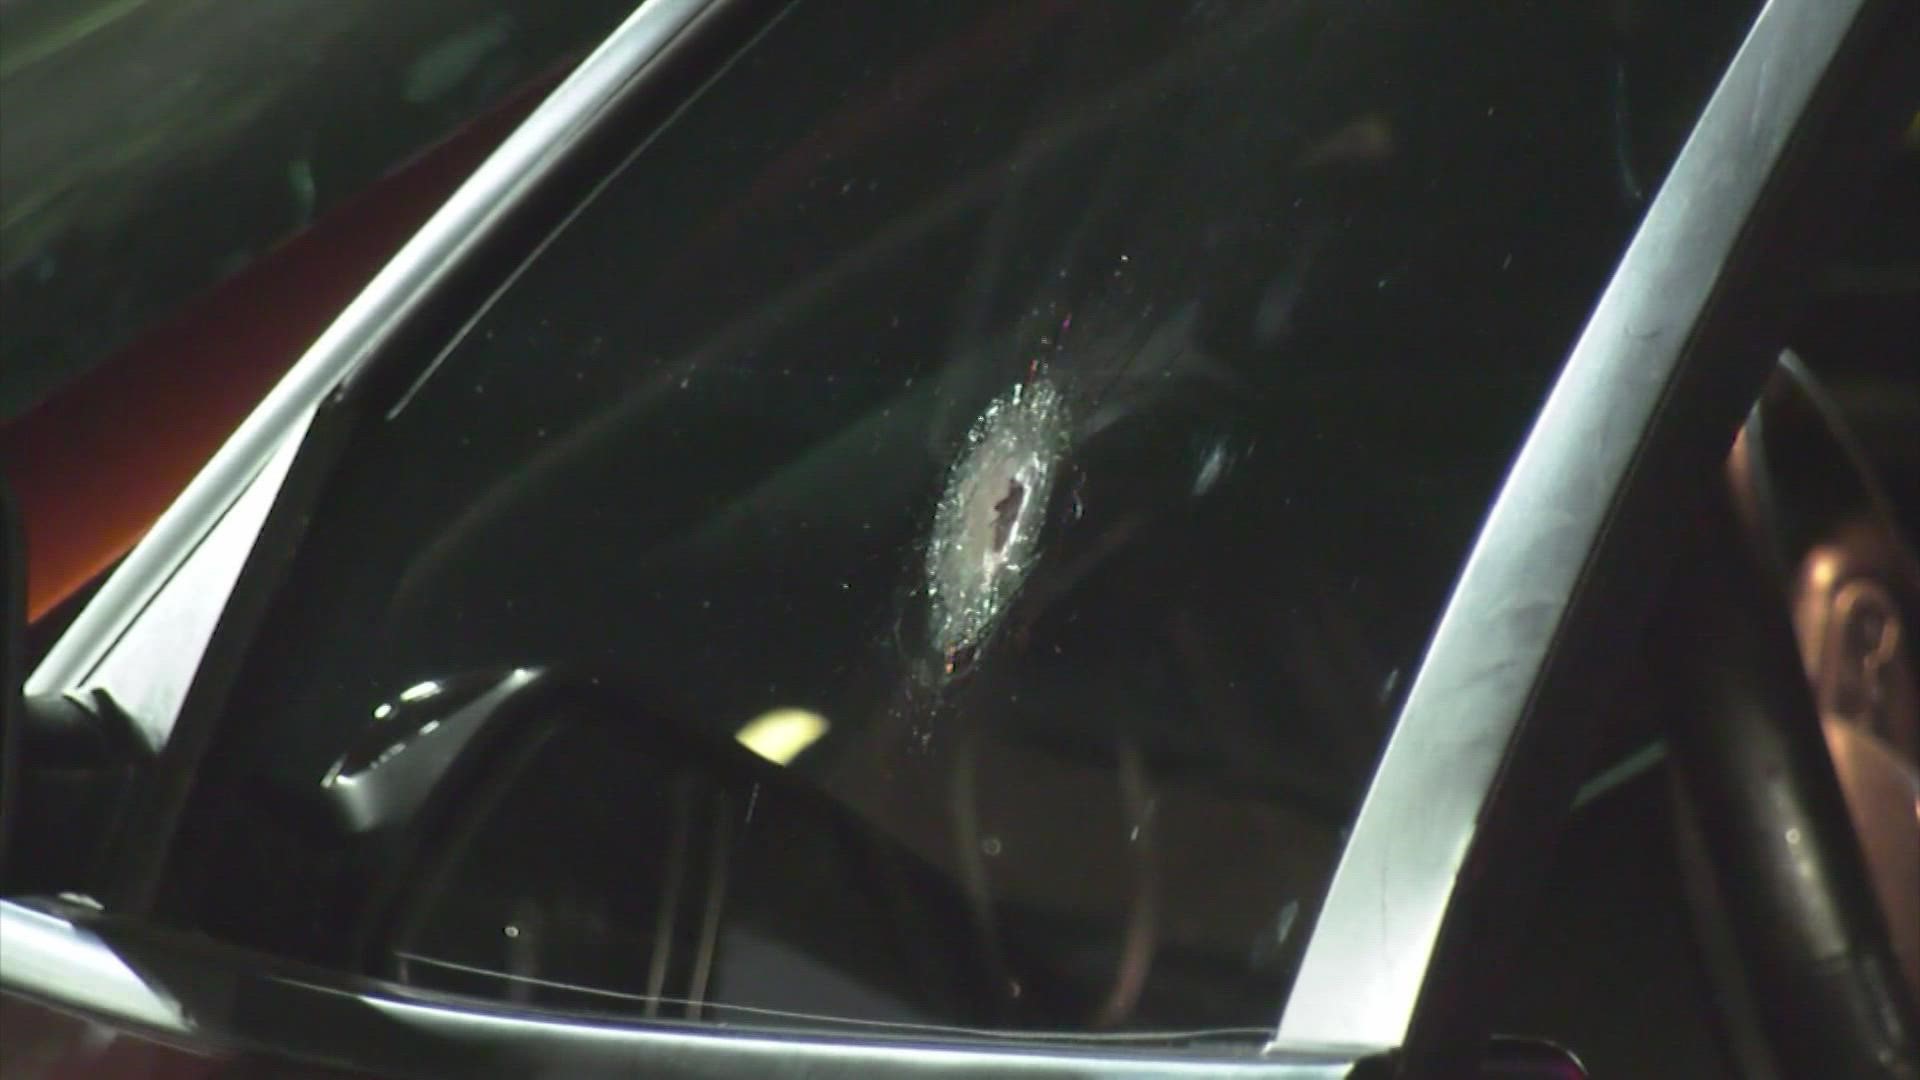 Deputy working security shoots driver who pinned him with car